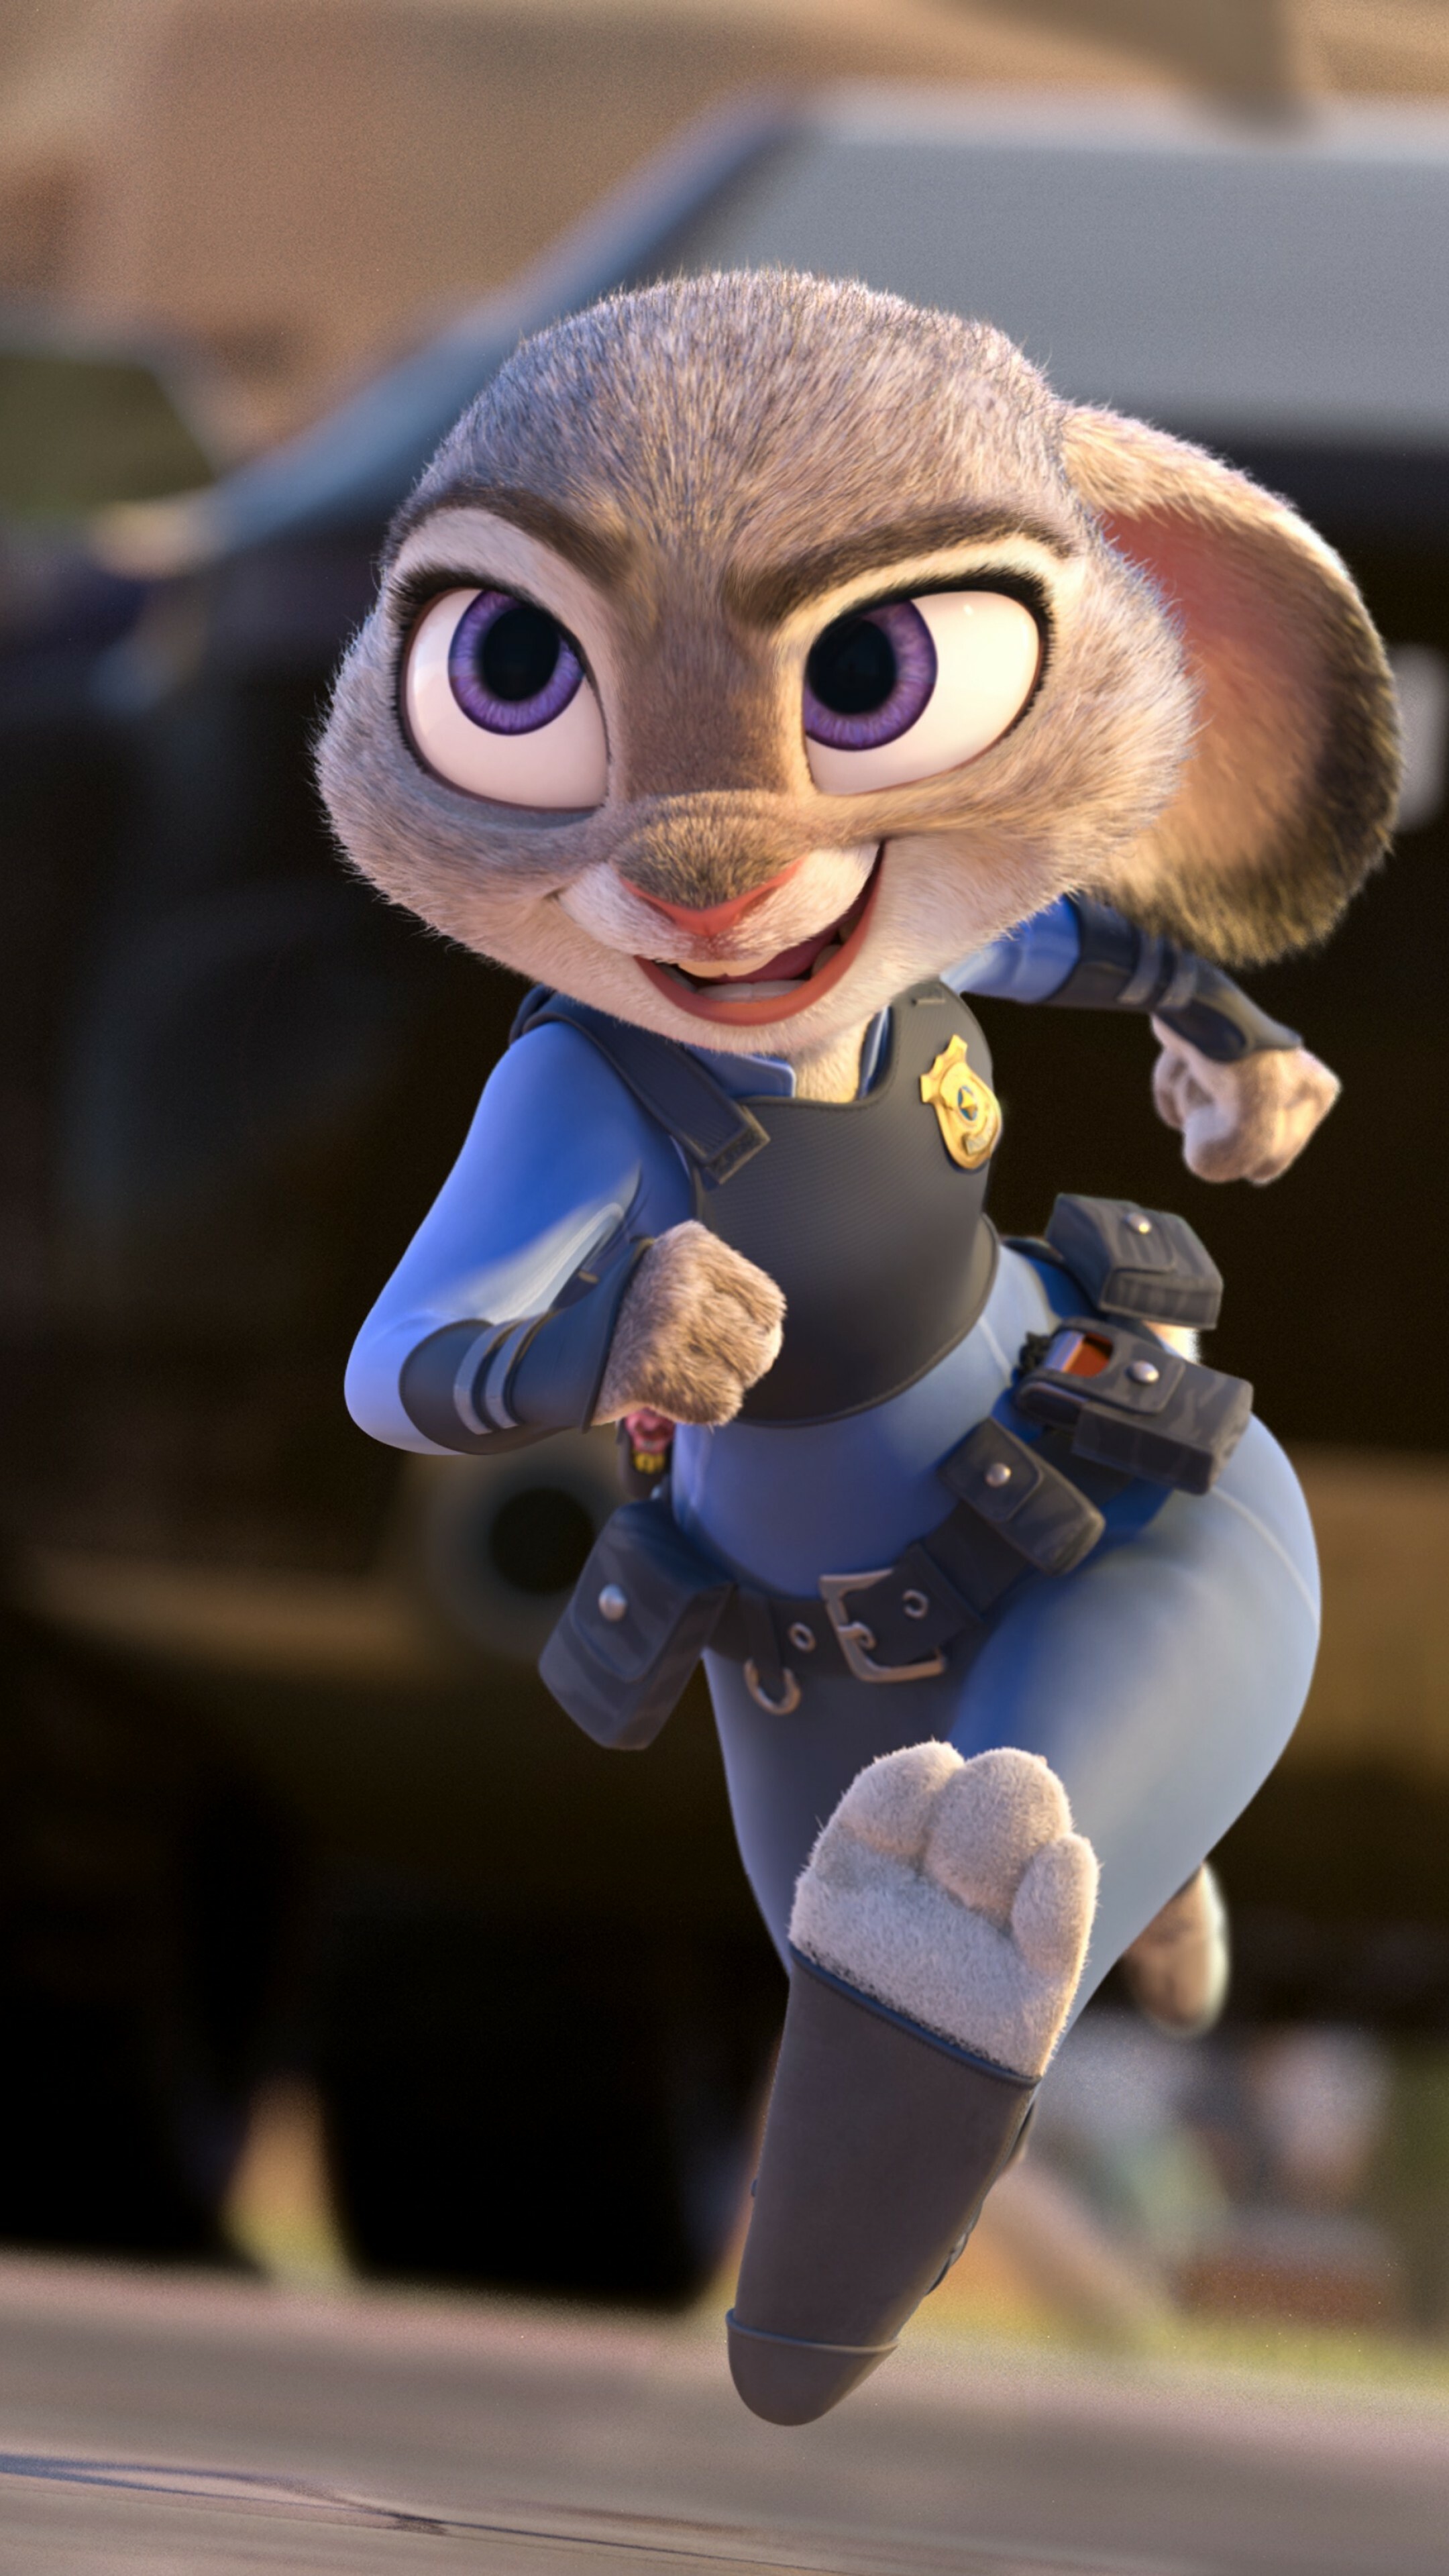 Zootopia: A young optimistic rabbit from Bunnyburrow who is a newly appointed member of the Police Department assigned to the 1st Precinct. 2160x3840 4K Wallpaper.